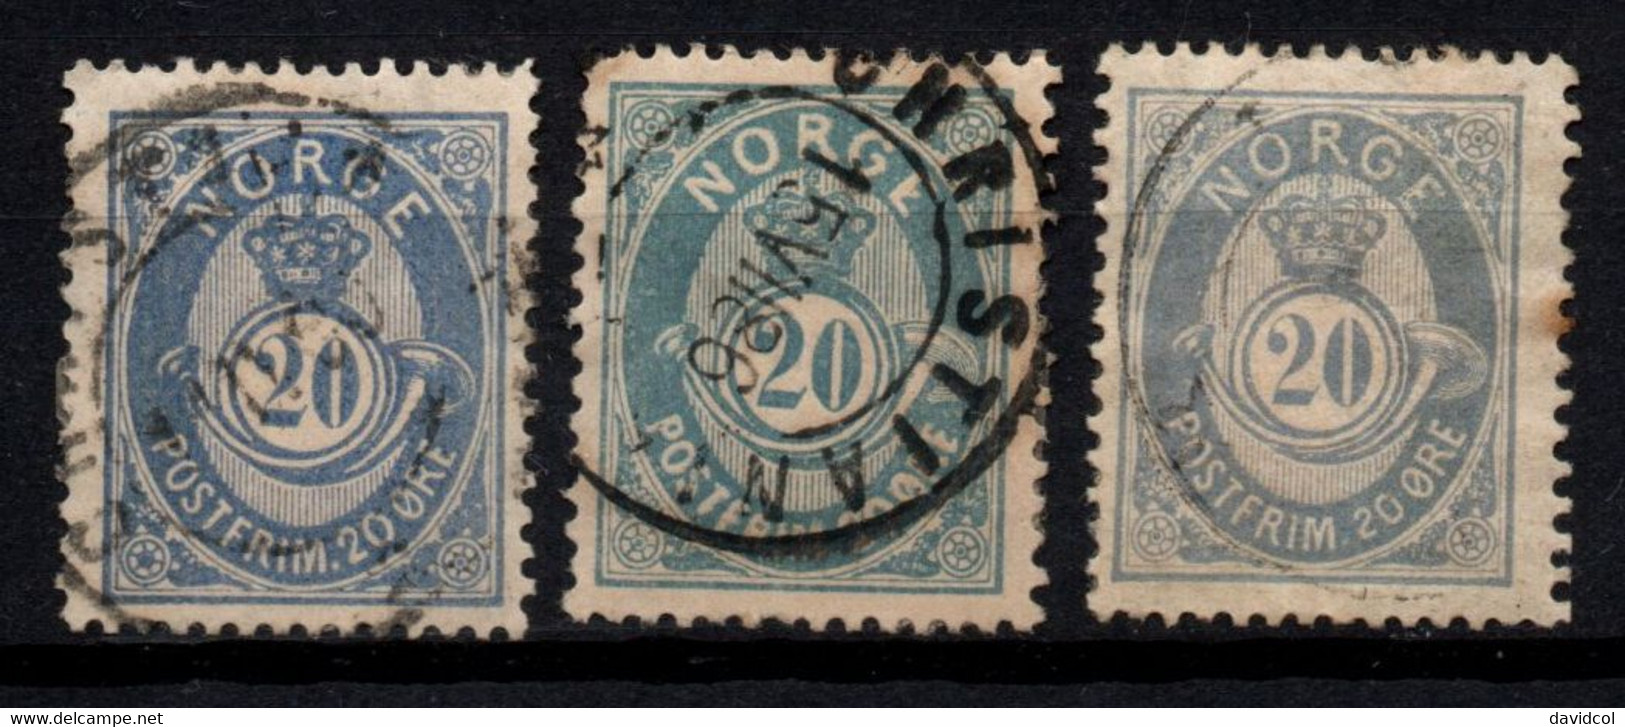 069- NORWAY 1882-1893 - SCOTT#: 44 - USED - 20 O - POSTHORN AND CROWN - Gebraucht